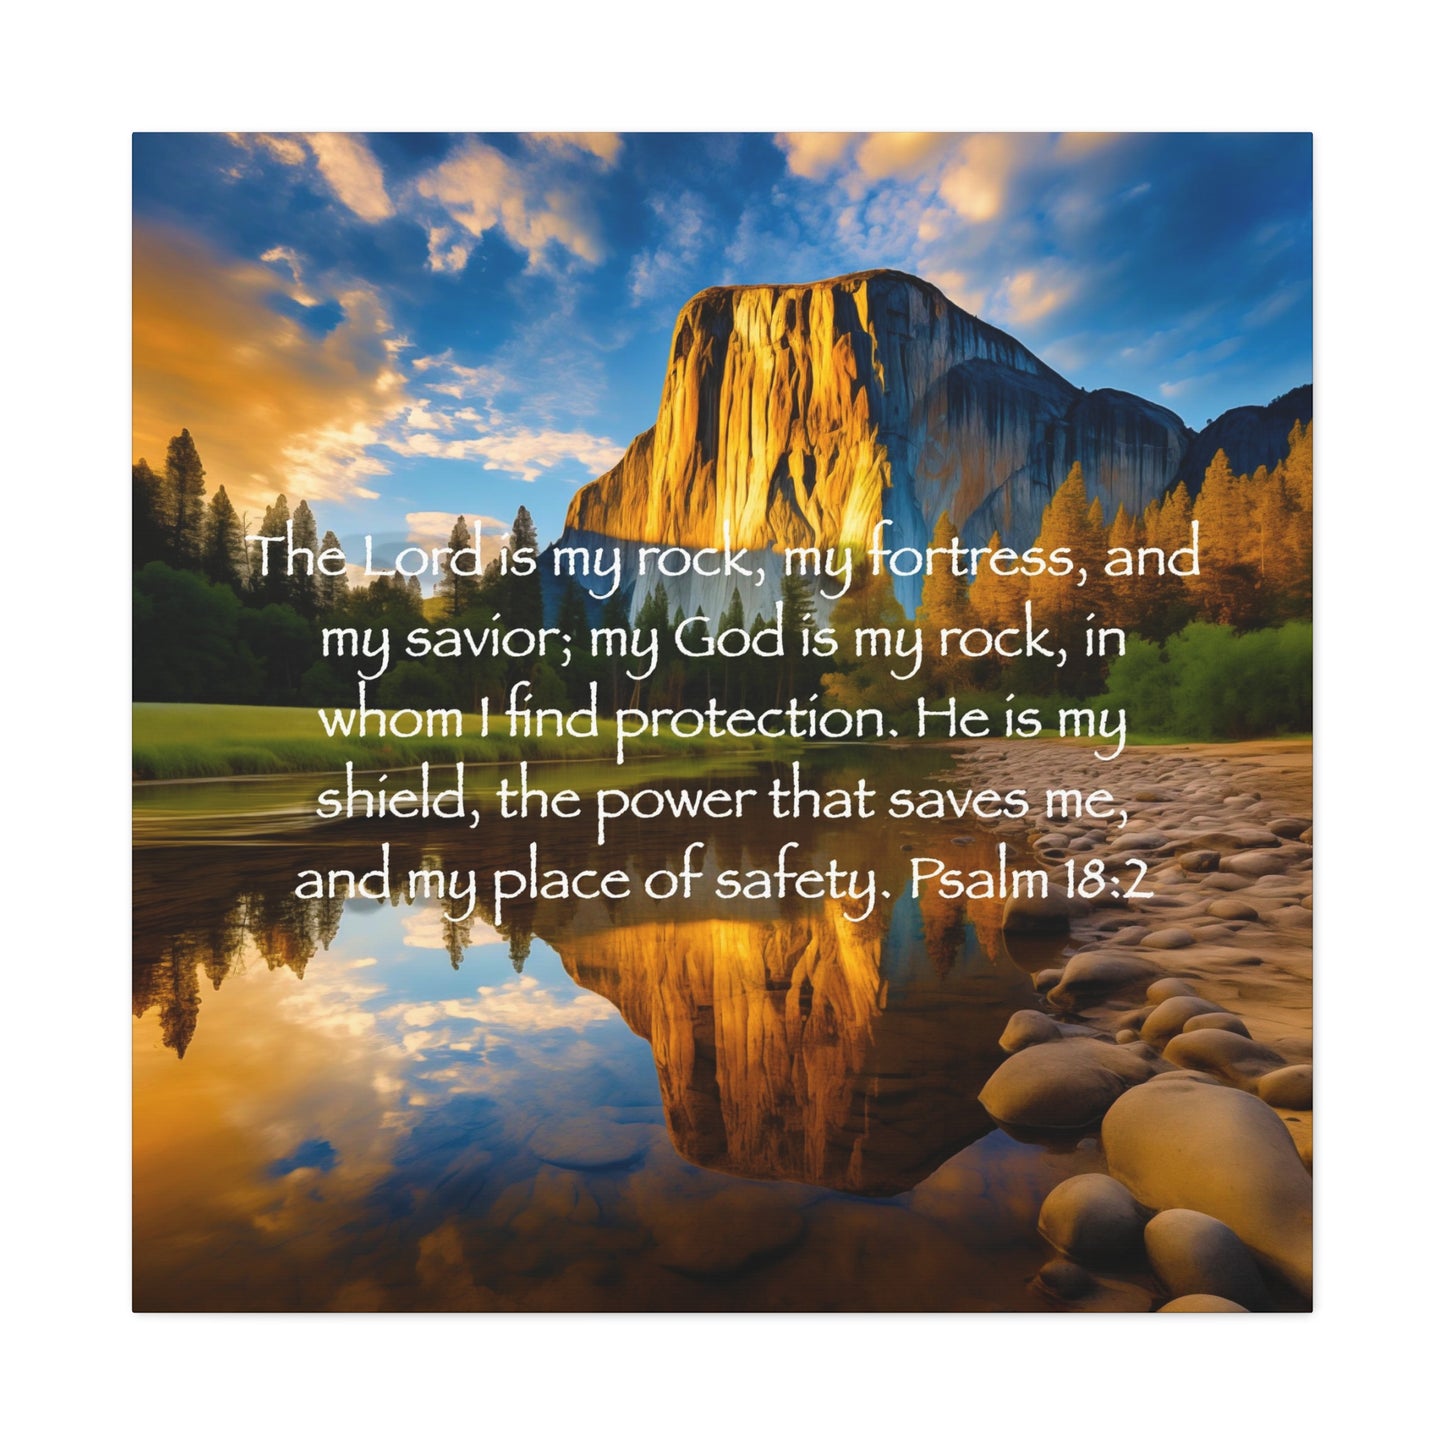 Christian art picture gifts the lord is my rock, Psalm 18:2 wall decor gifts for Christians